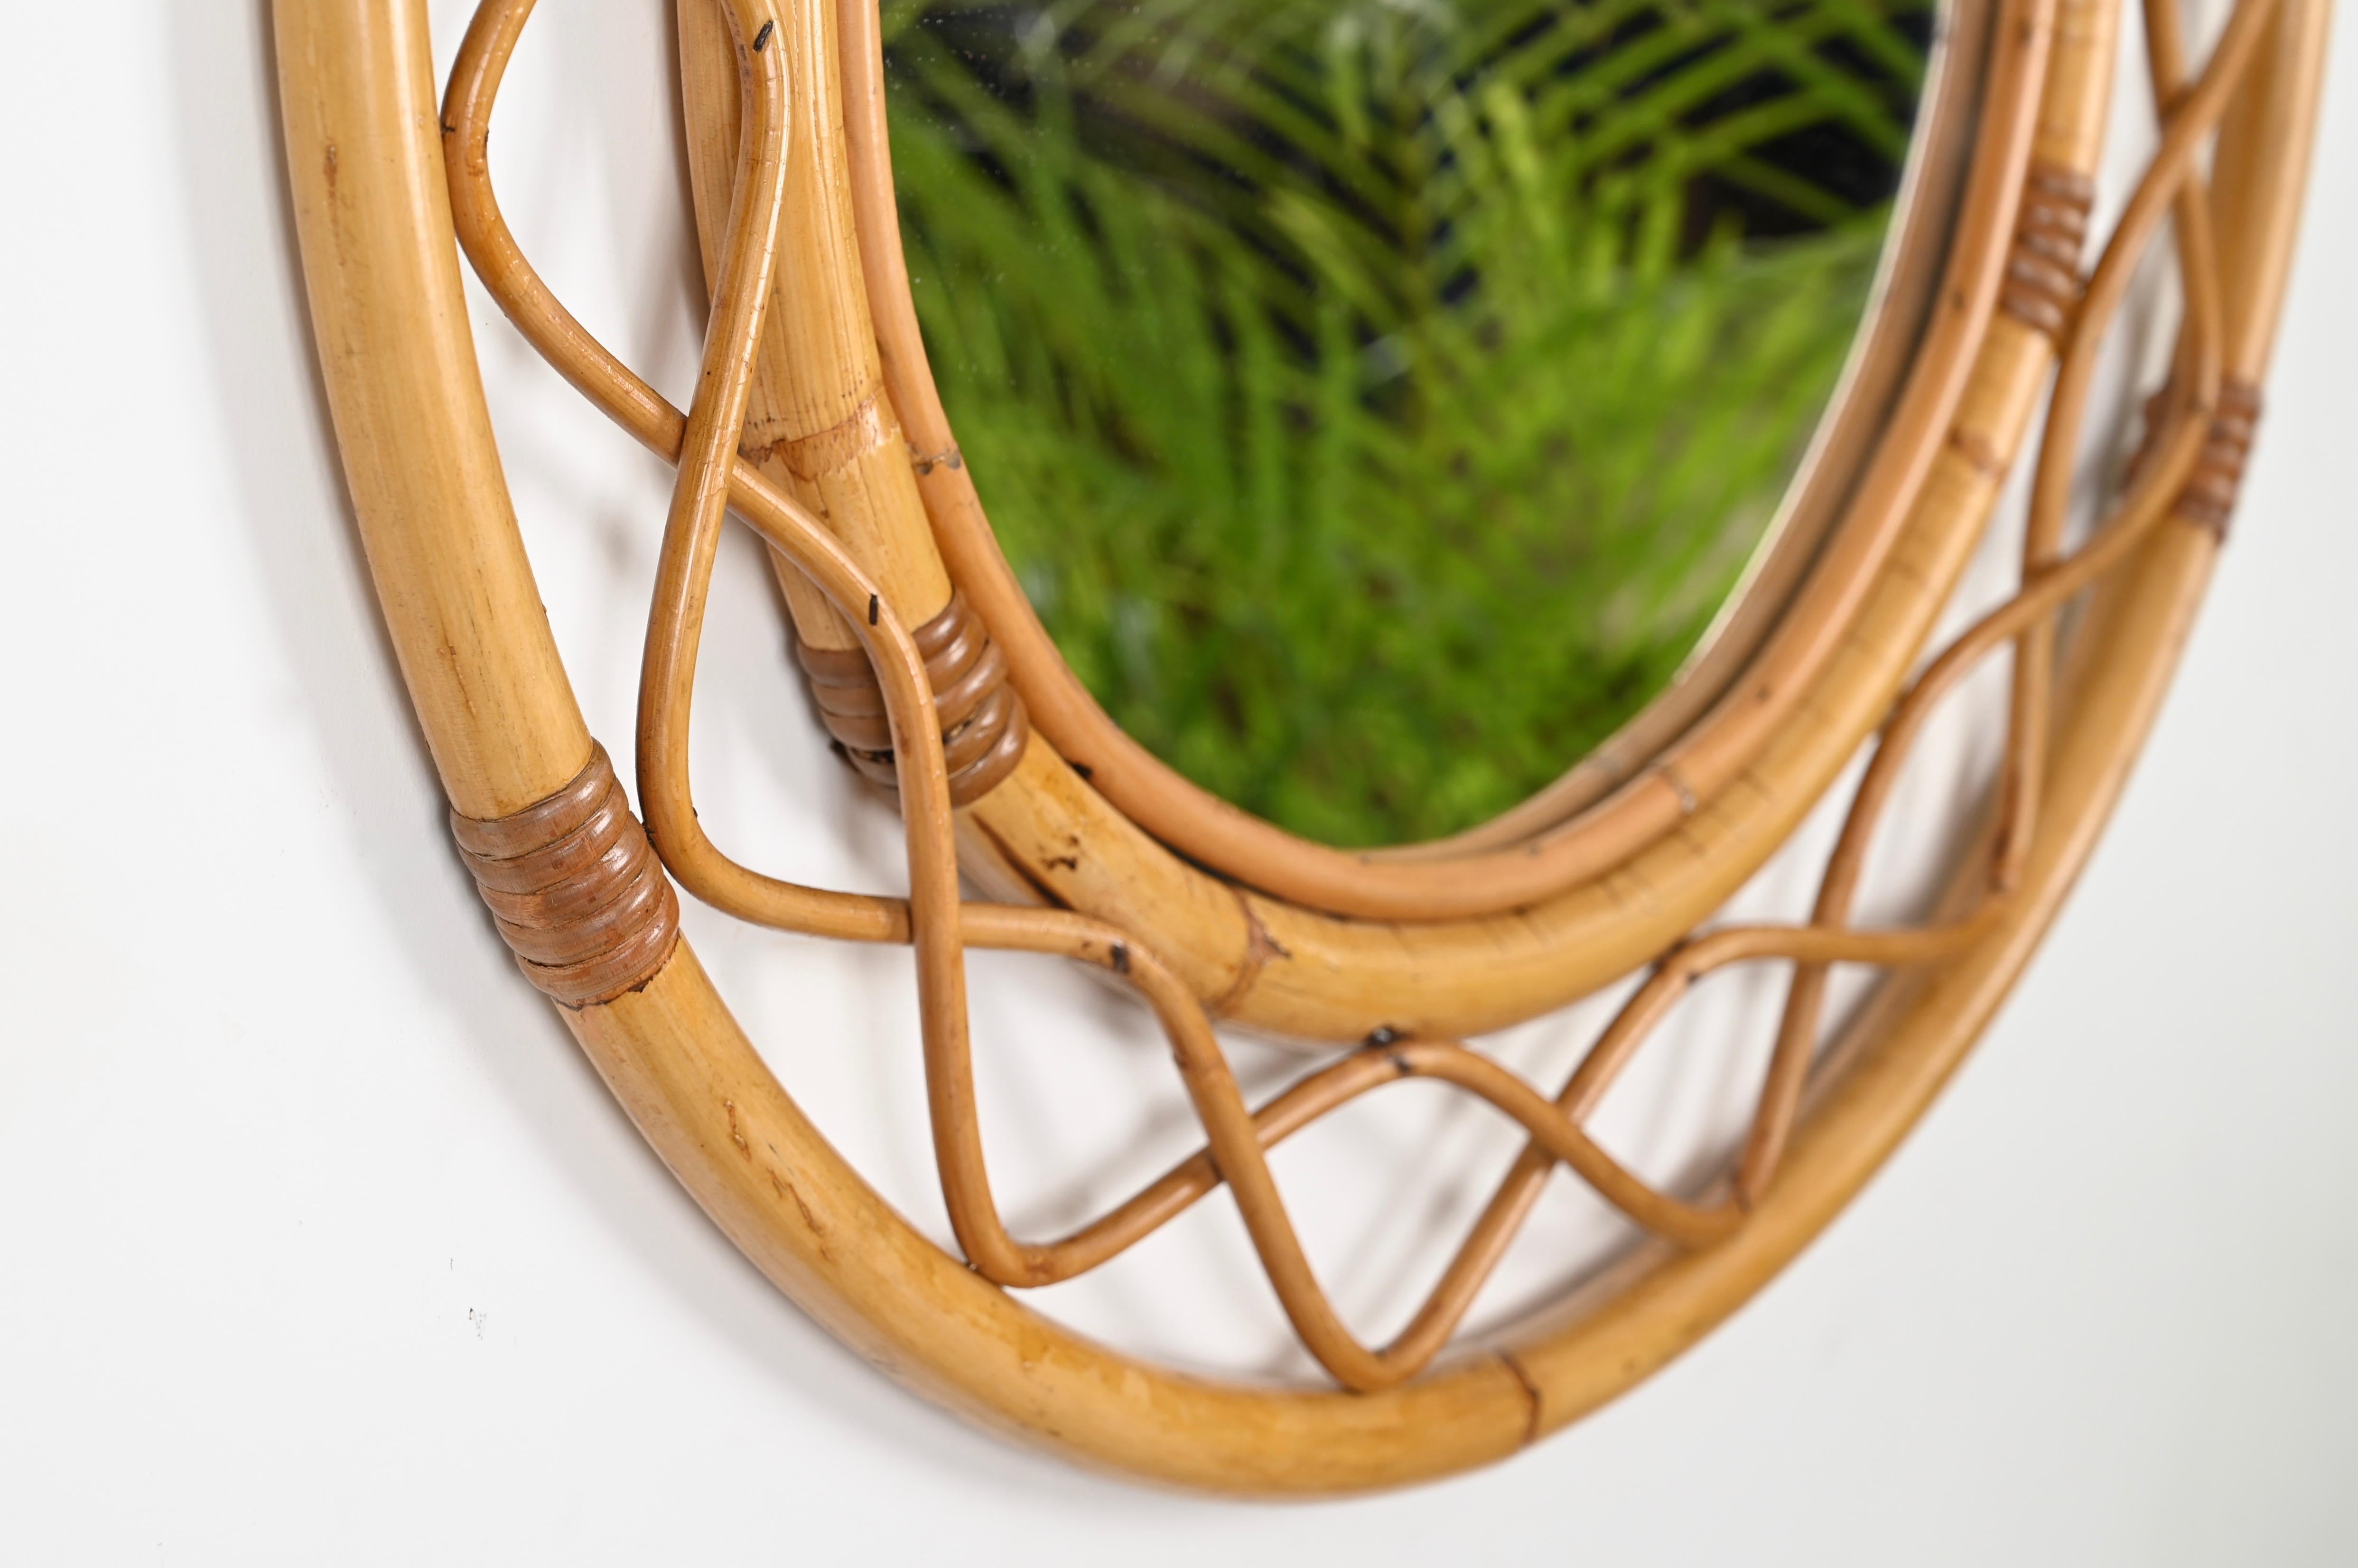 Midcentury Round Italian Mirror, Curved Bamboo, Rattan and Wicker Frame, 1960s For Sale 3